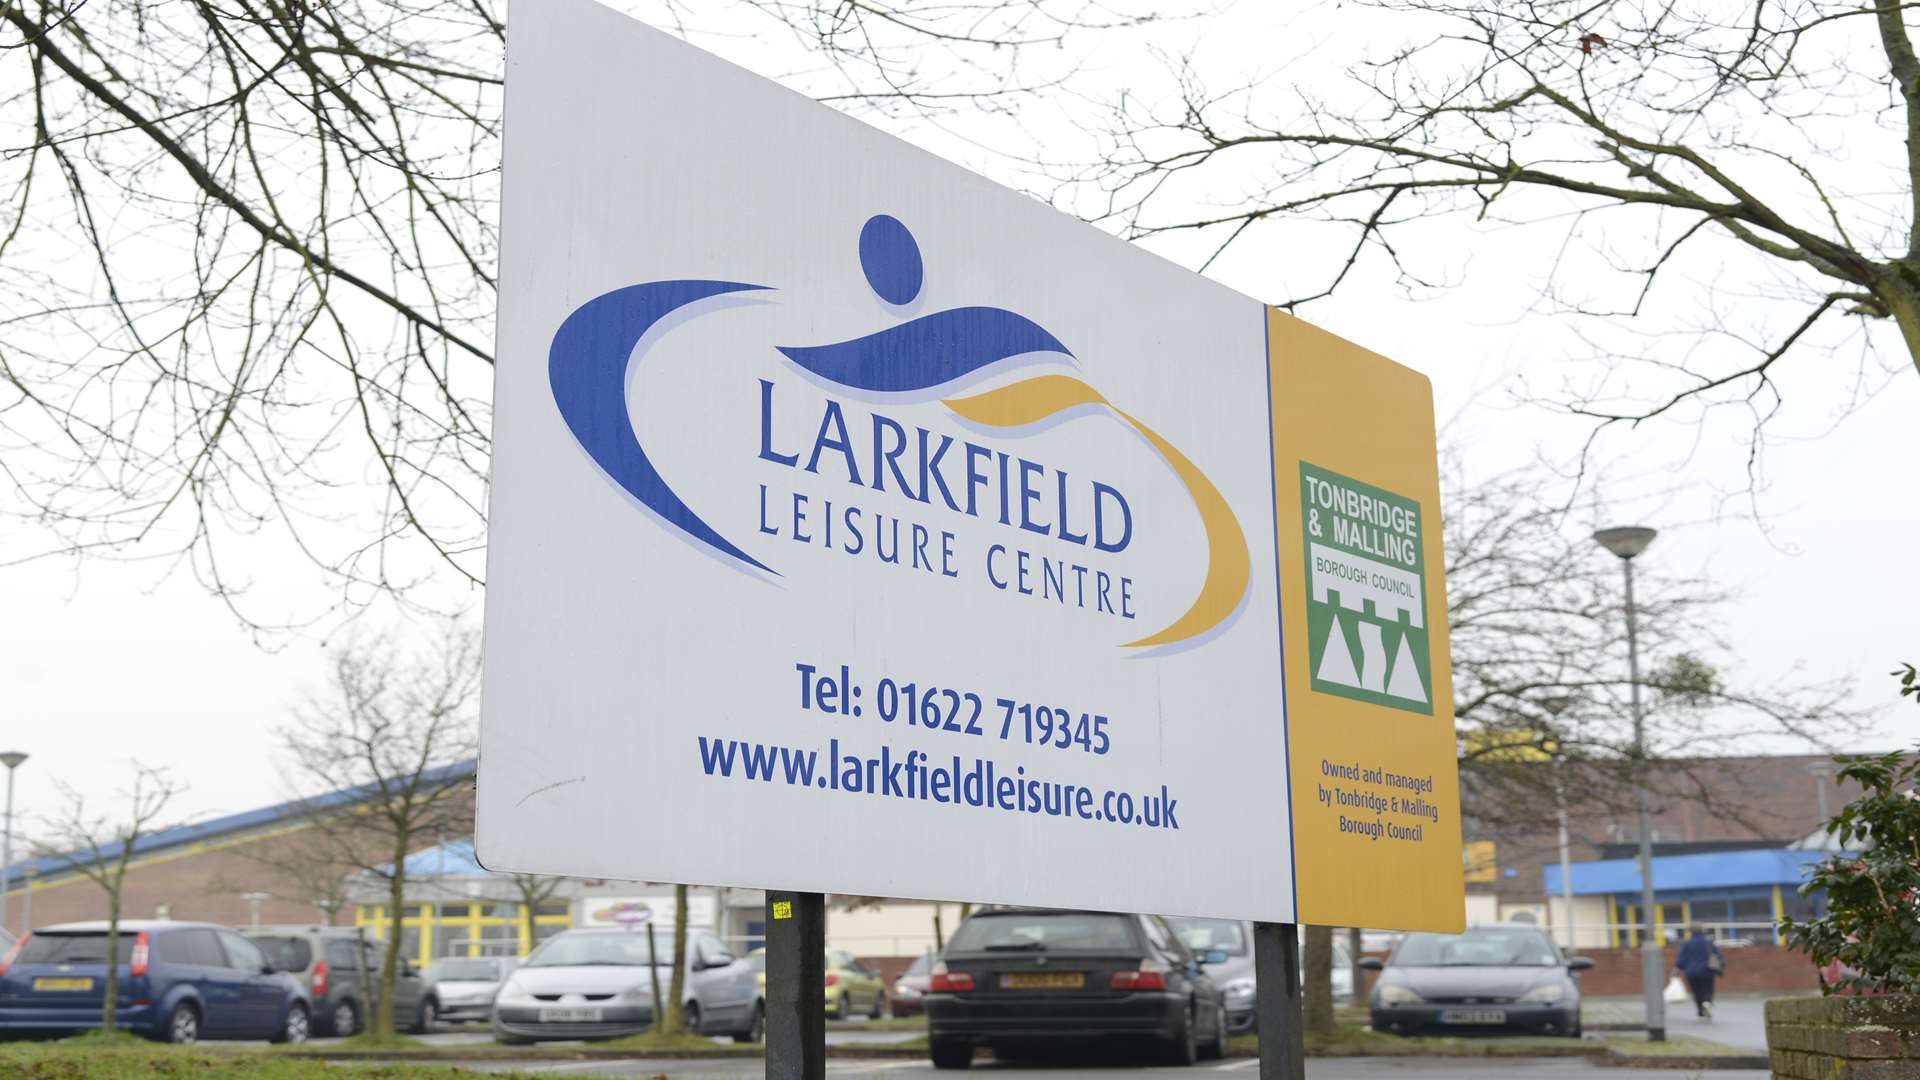 Larkfield Leisure Centre, New Hythe Lane, Larkfield. Picture by: Martin Apps